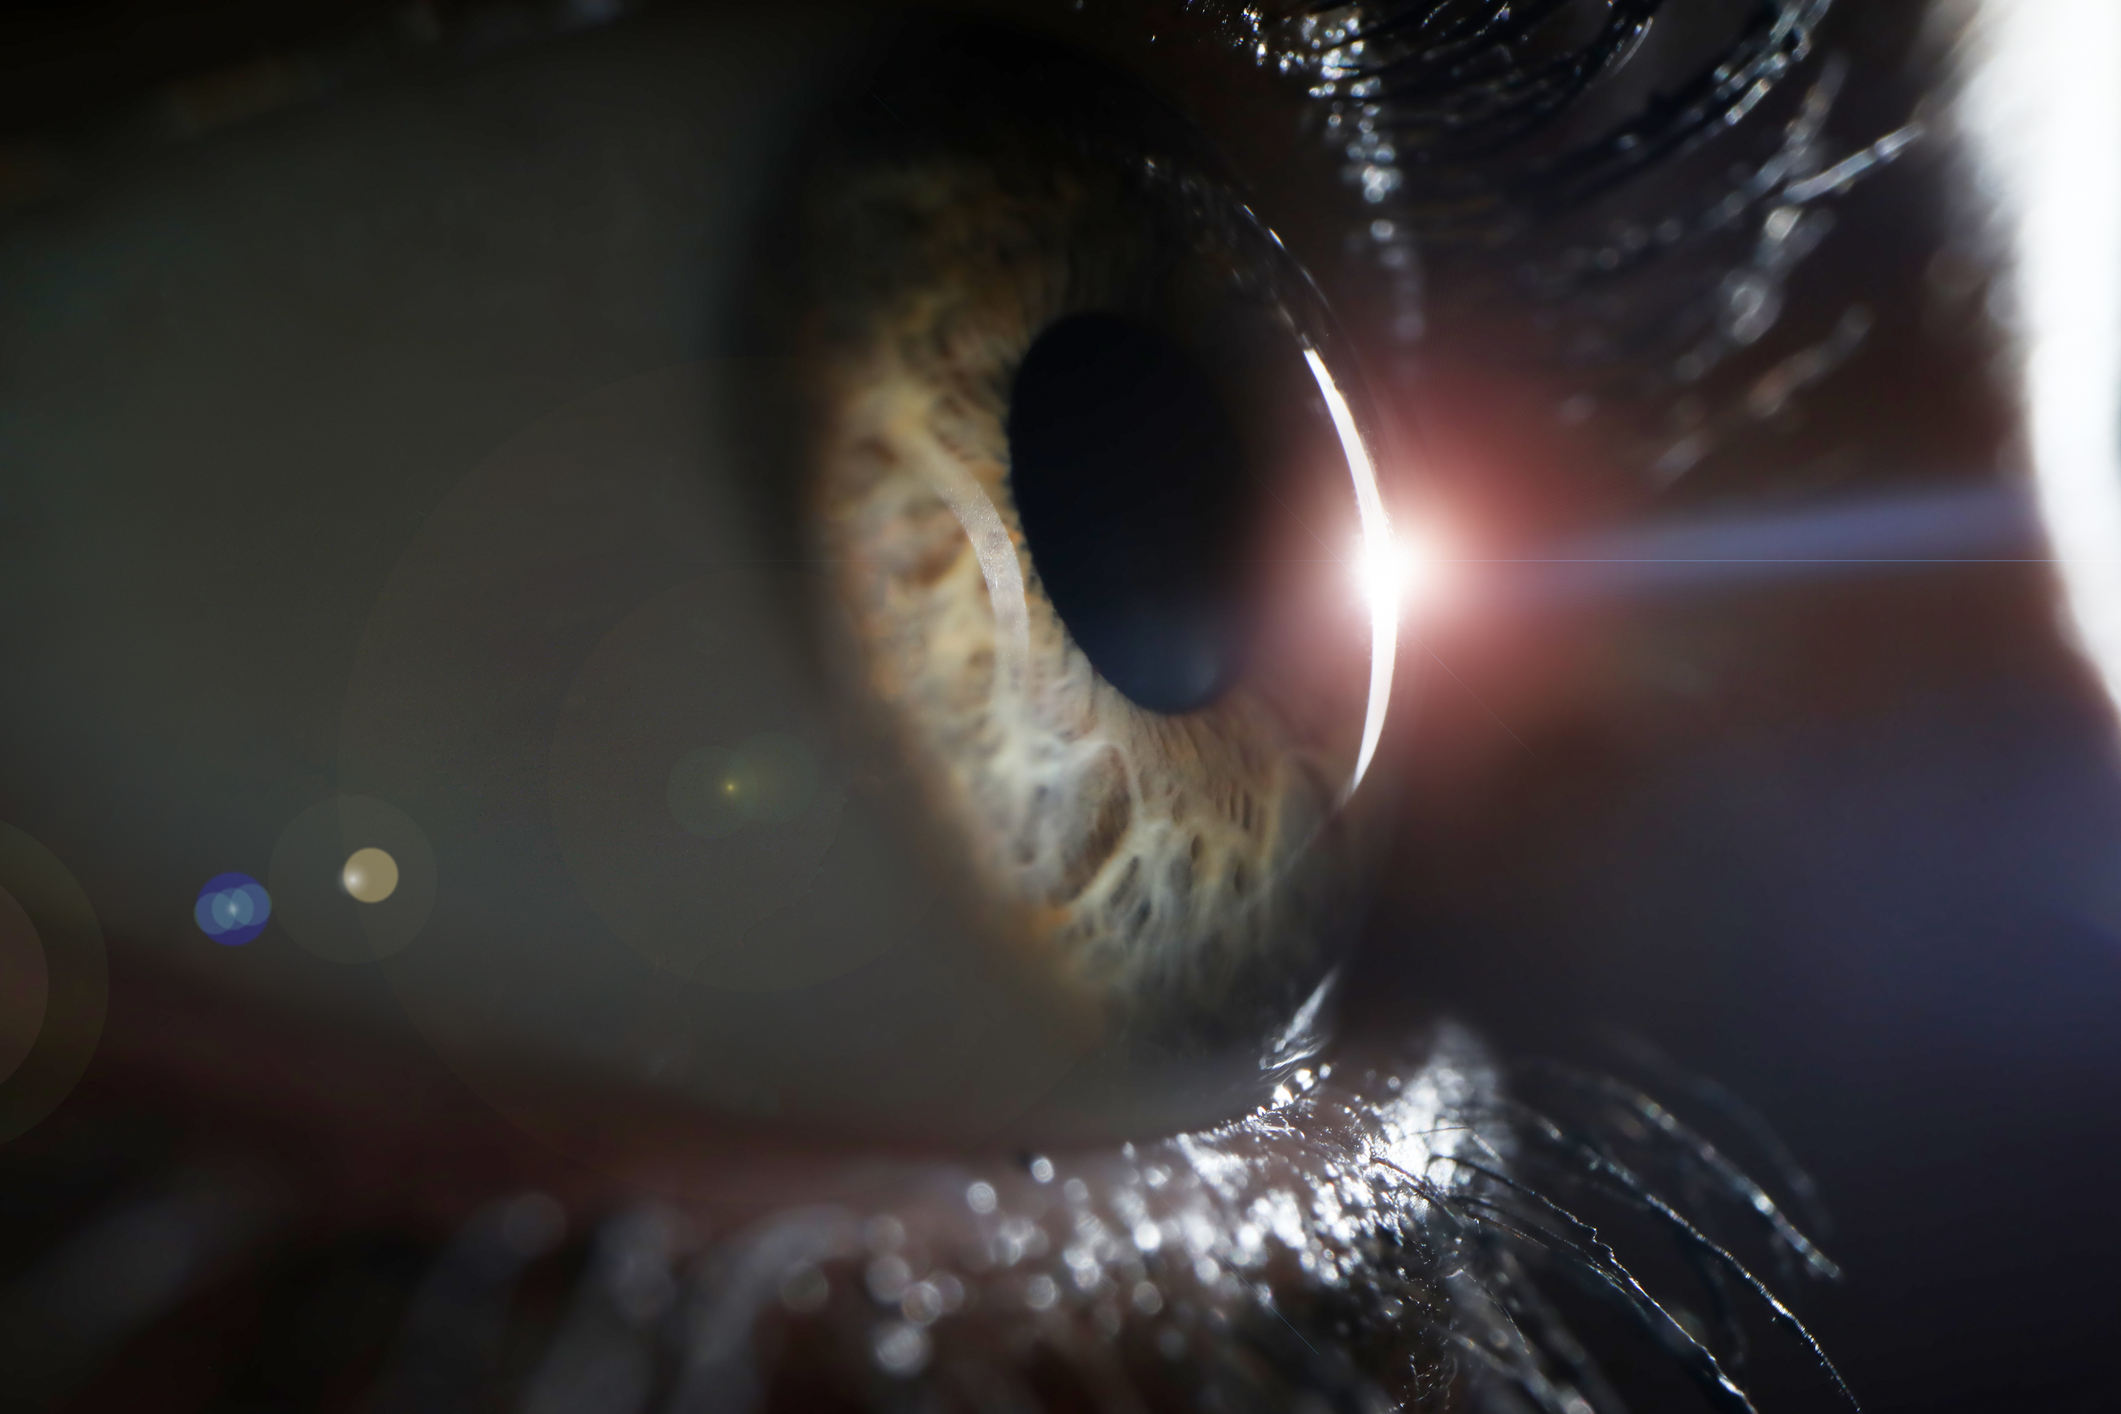 The Optic Nerve: Key to Seeing Things Clearly